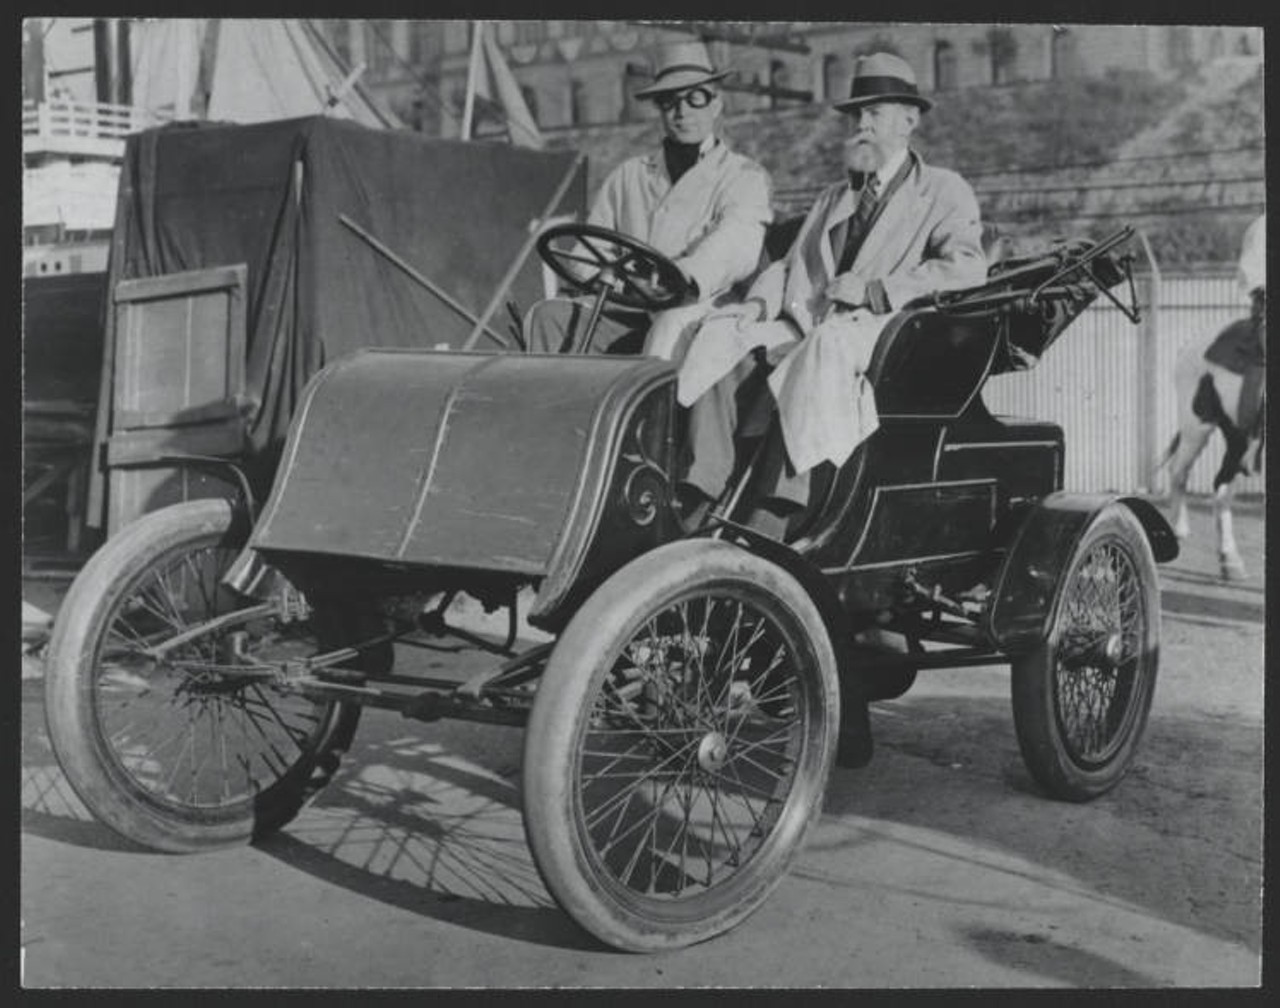 During the Great Lakes Exposition this early Winton car was used in the Parade of the Years. Mr. Charles A. Post, seated at the right, had ridden in this car when it was new. One day during the Exposition he was asked to ride in the parade for the sake of old times. The man at the left represented Alexander Winton. ca 1936-1937